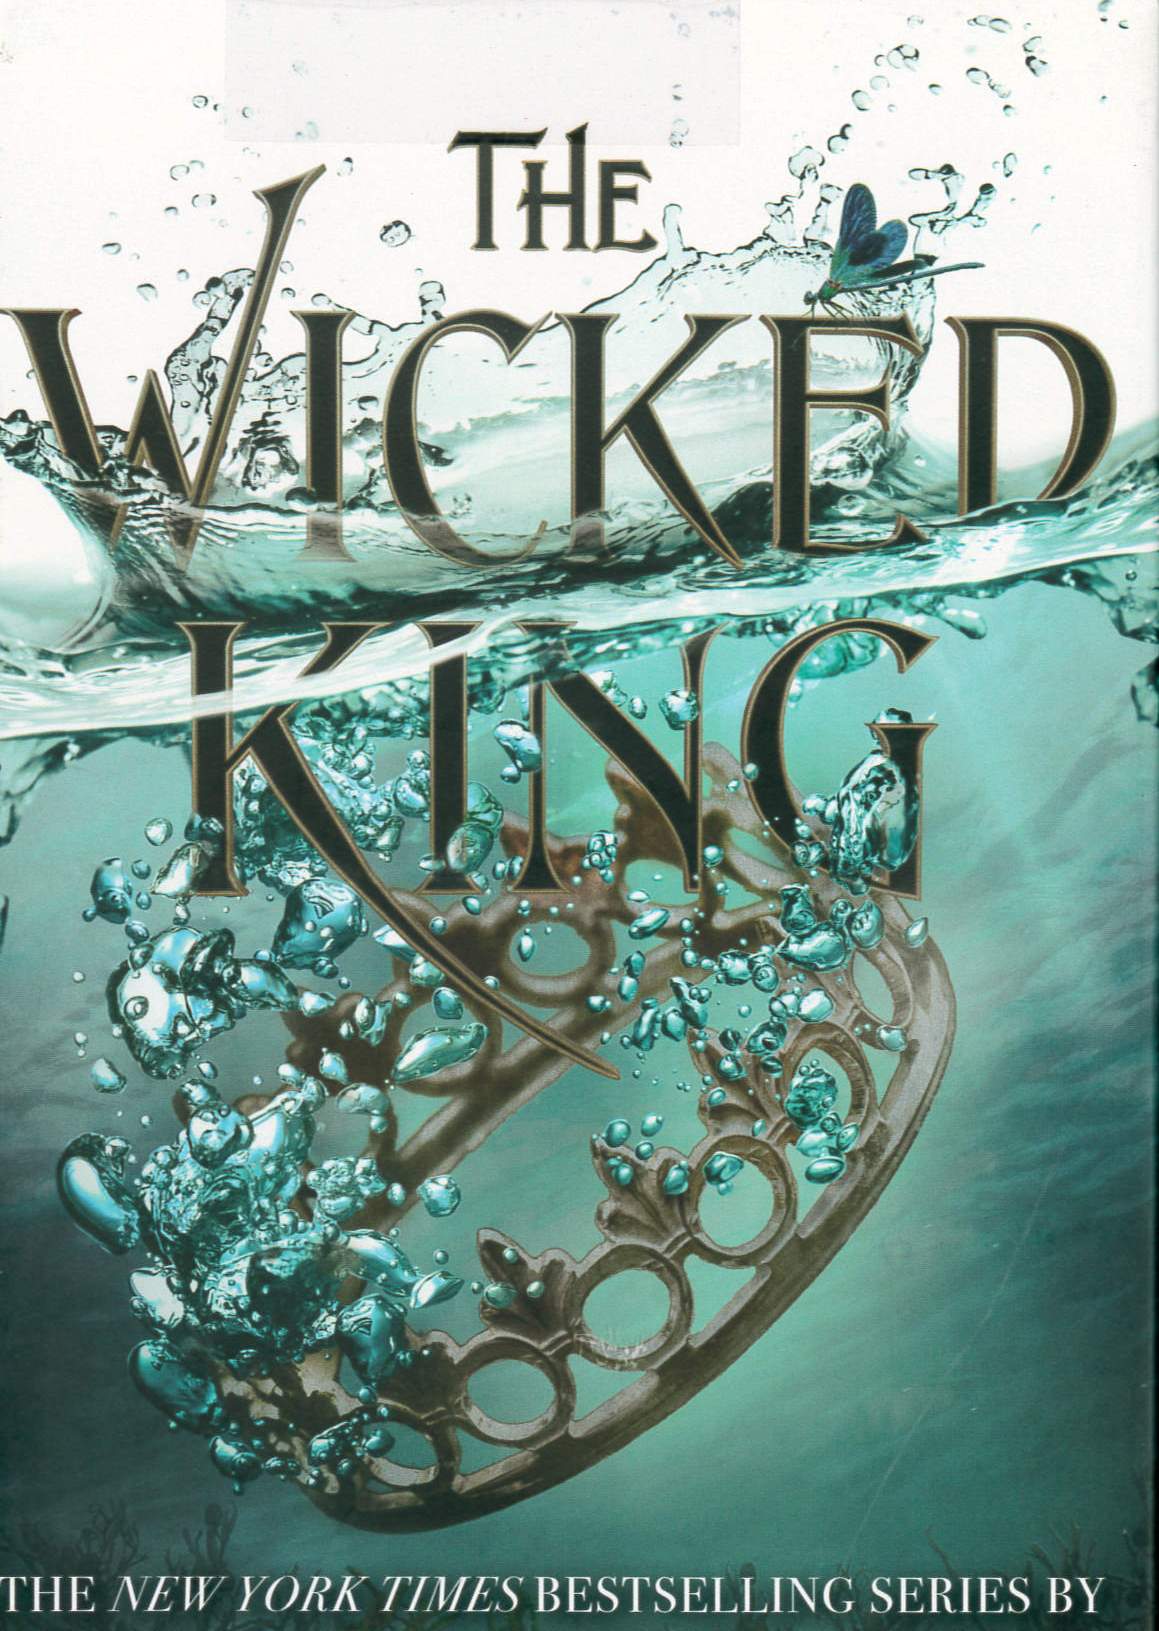 The wicked king /